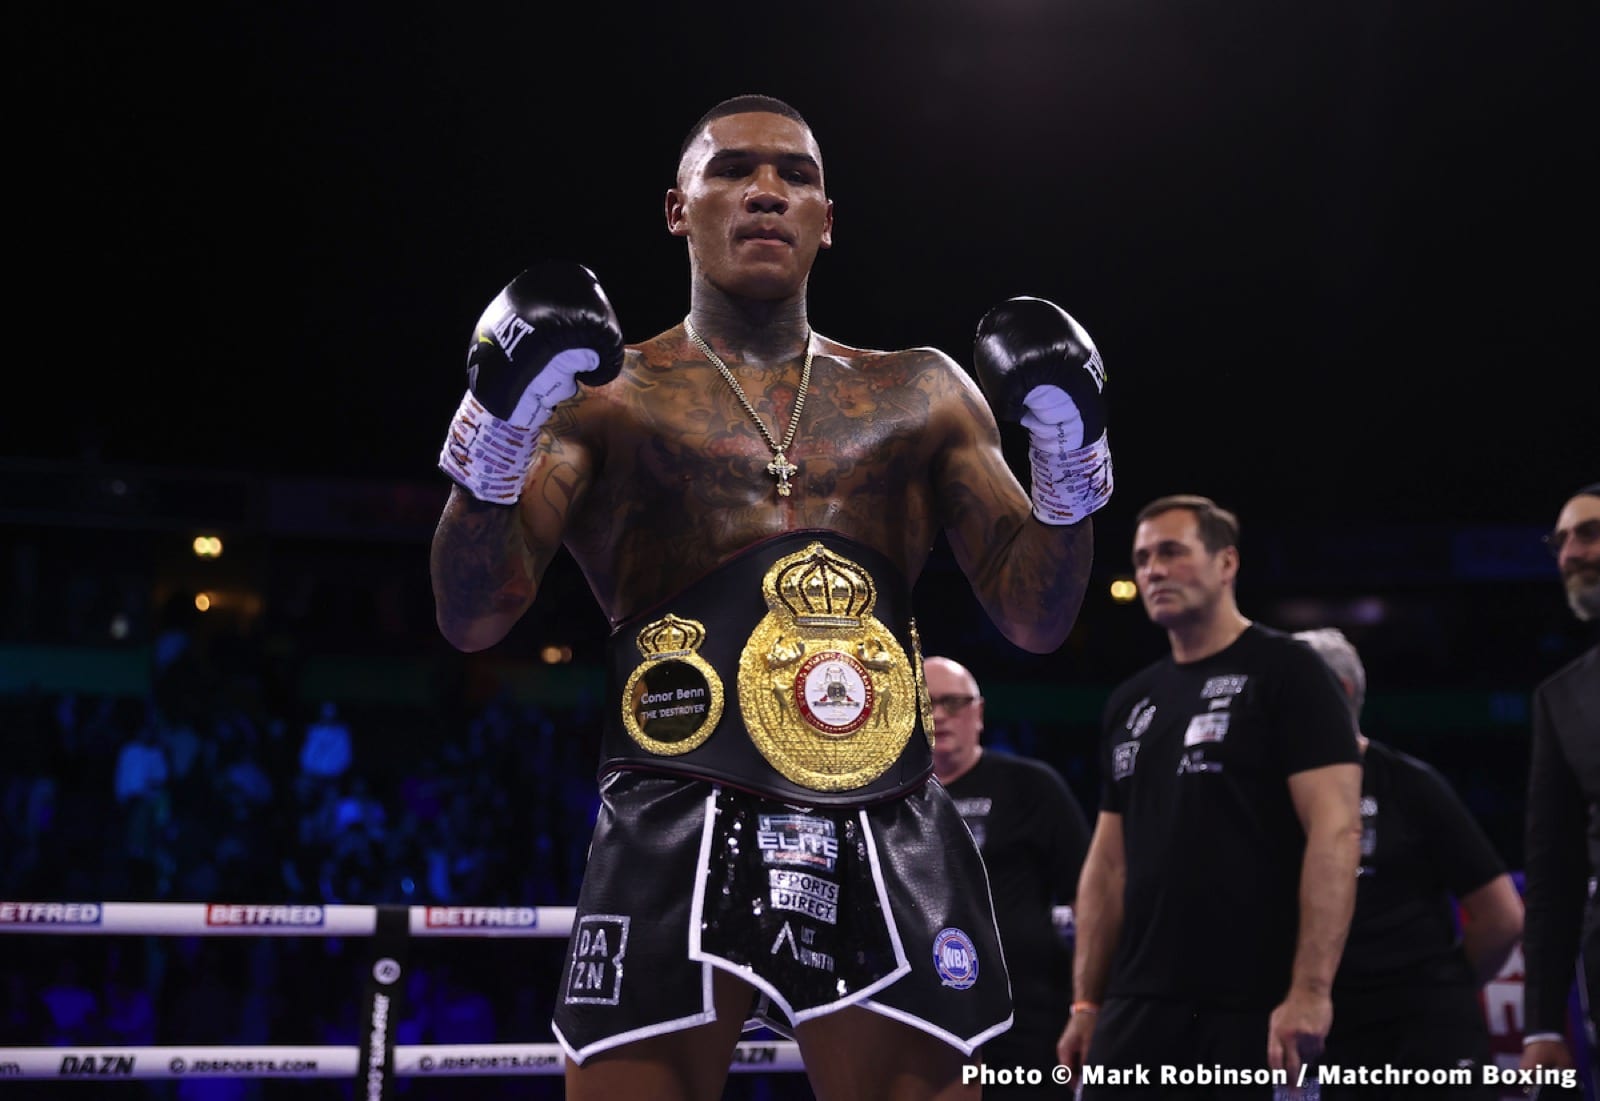 Image: "It's down to Conor Benn for the B-sample" - Kalle Sauerland